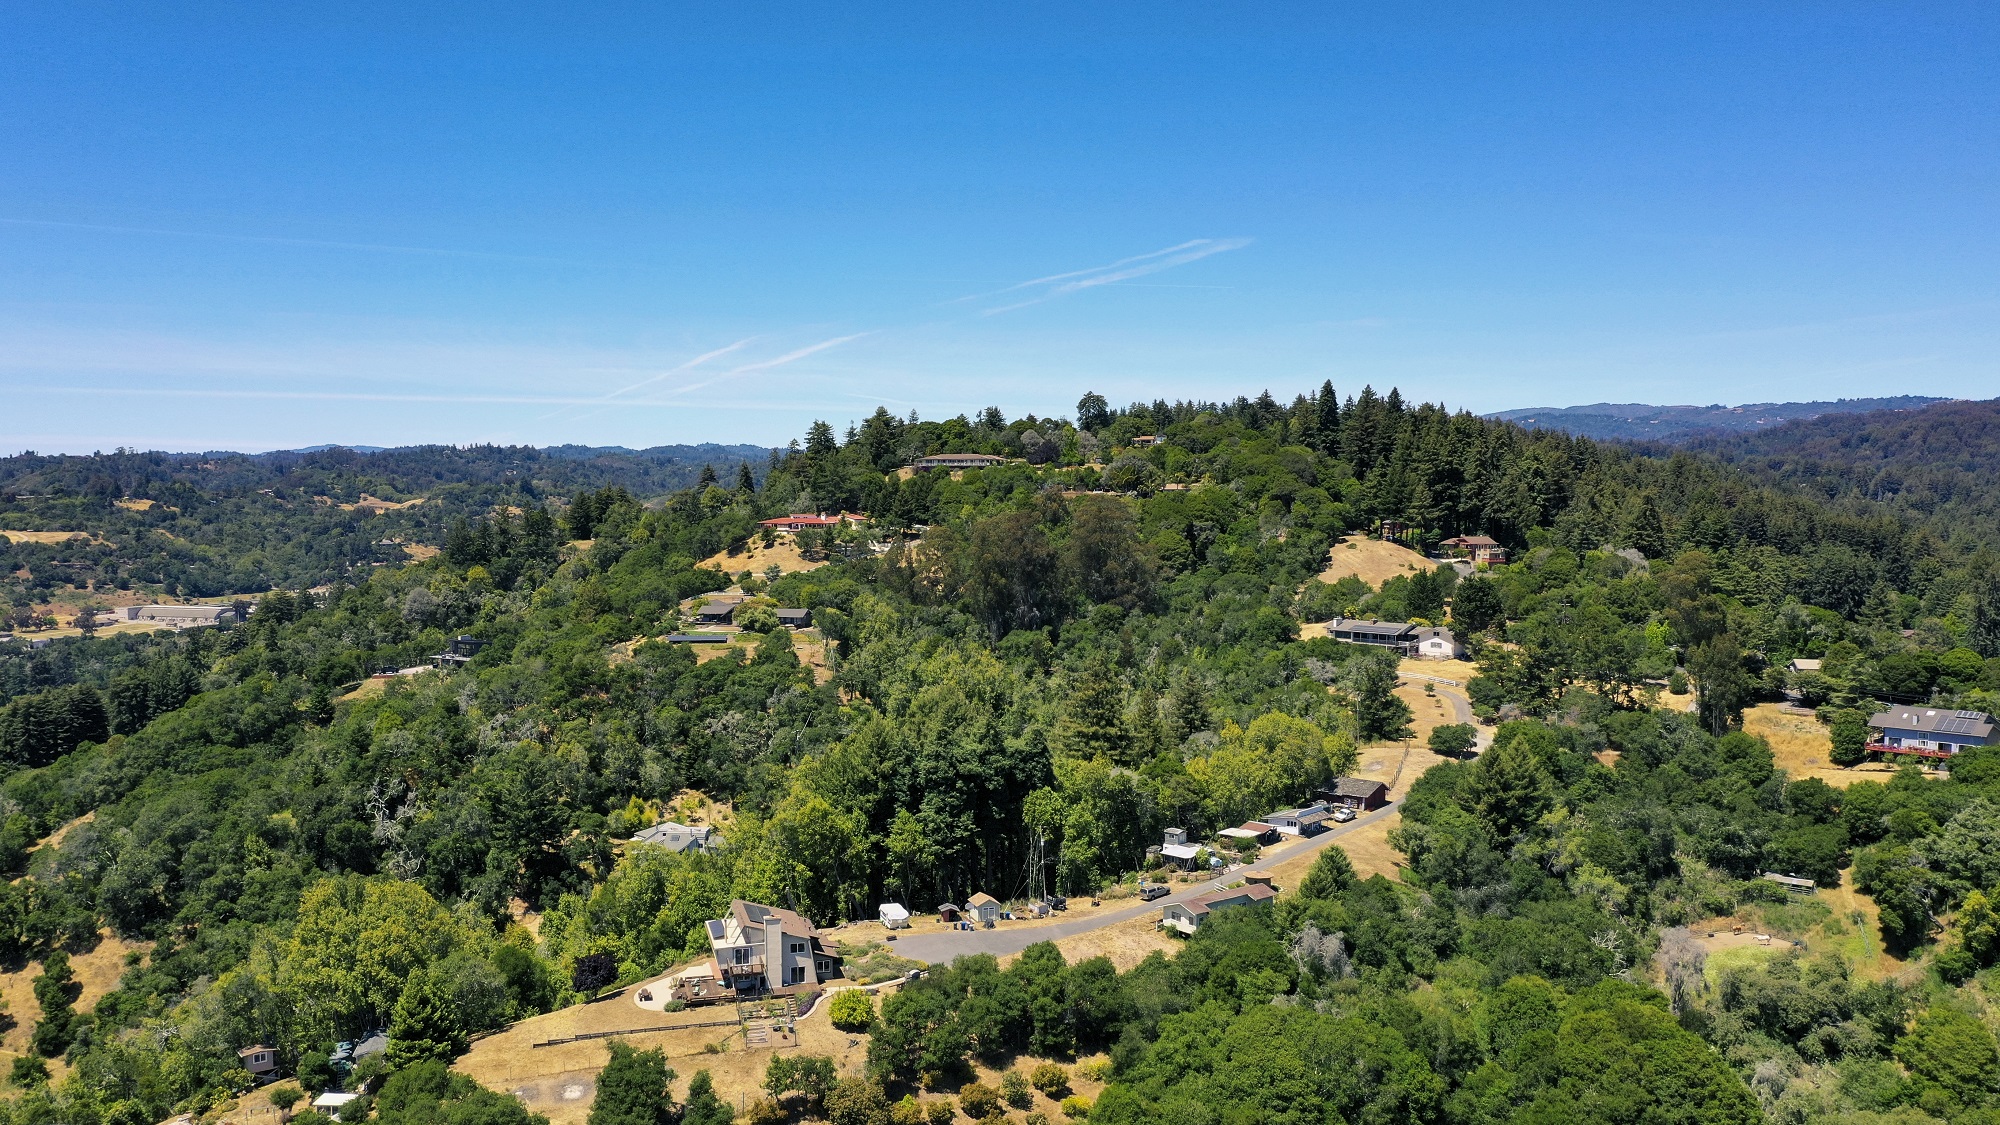 Soquel and The Summit